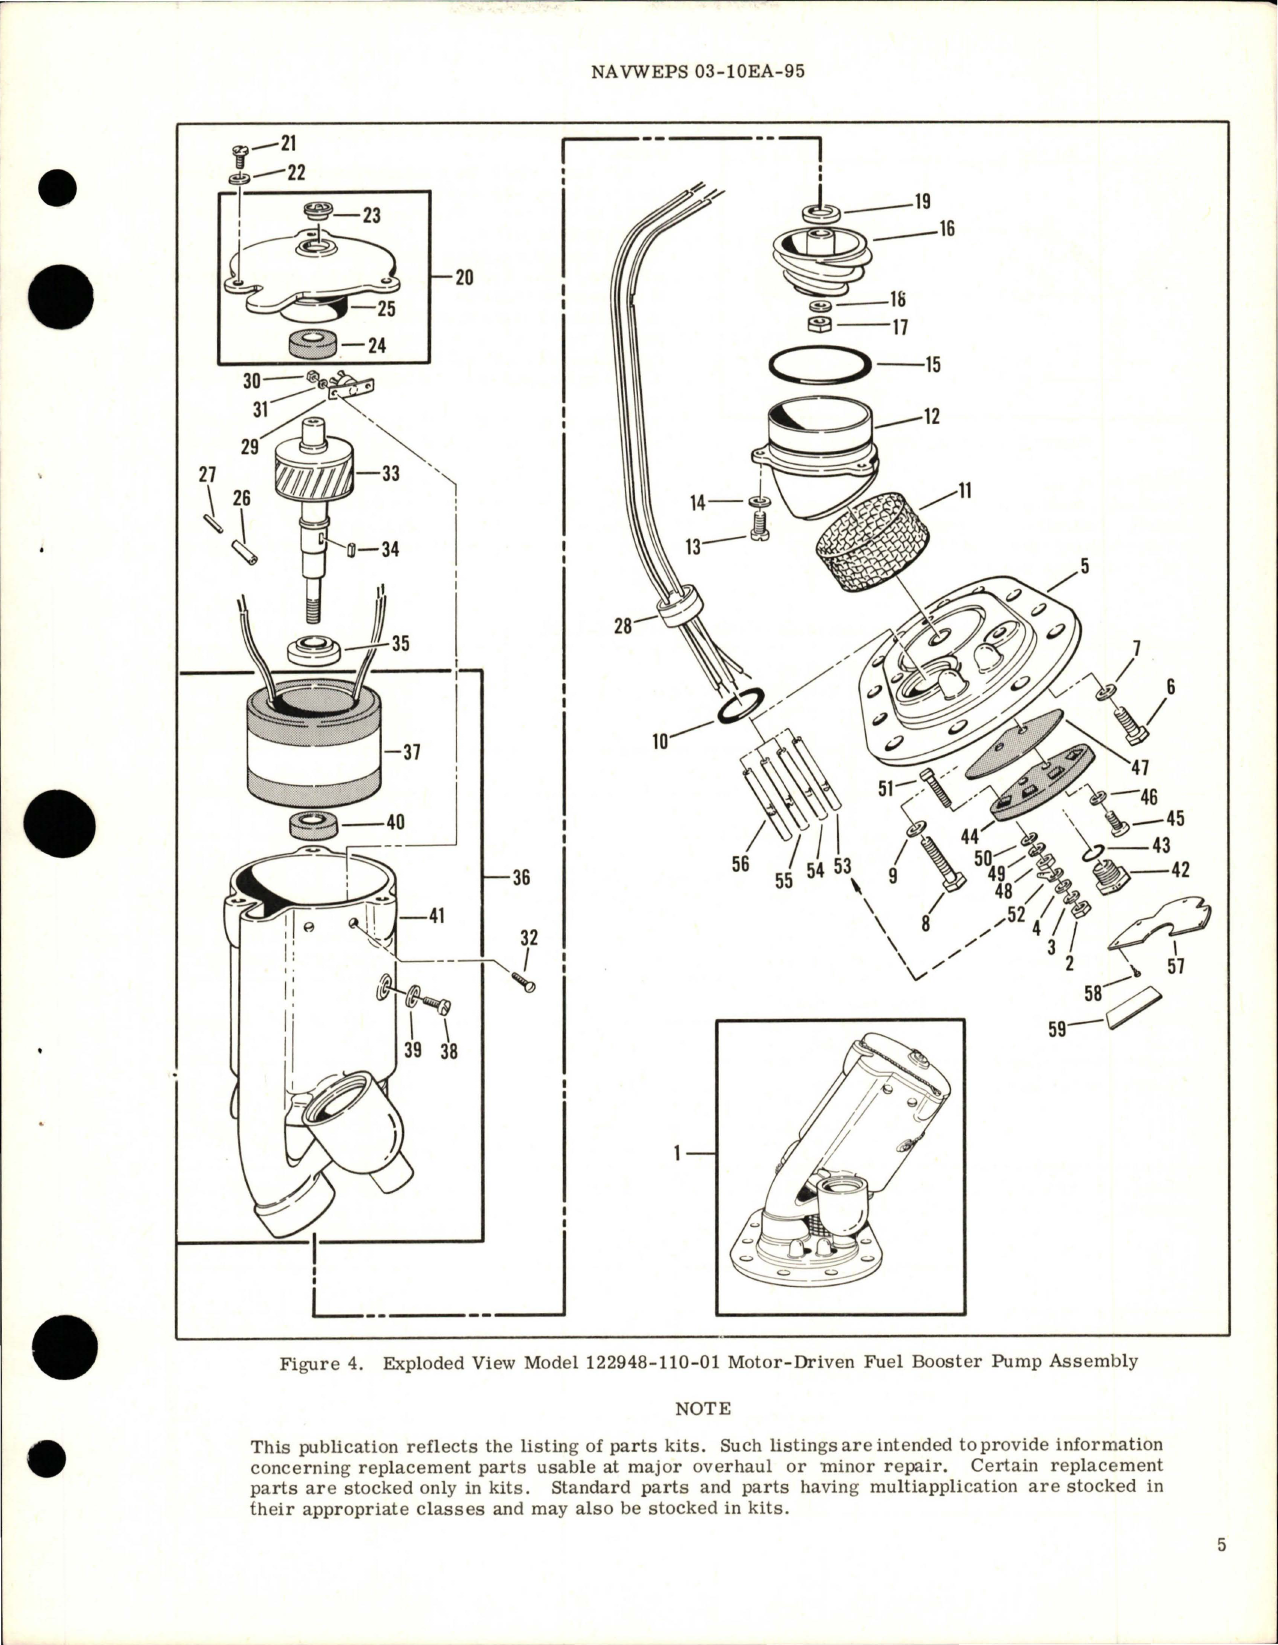 Sample page 5 from AirCorps Library document: Overhaul Instructions with Parts for Motor Driven Fuel Booster Pump Assembly - Model 122948-110-01 